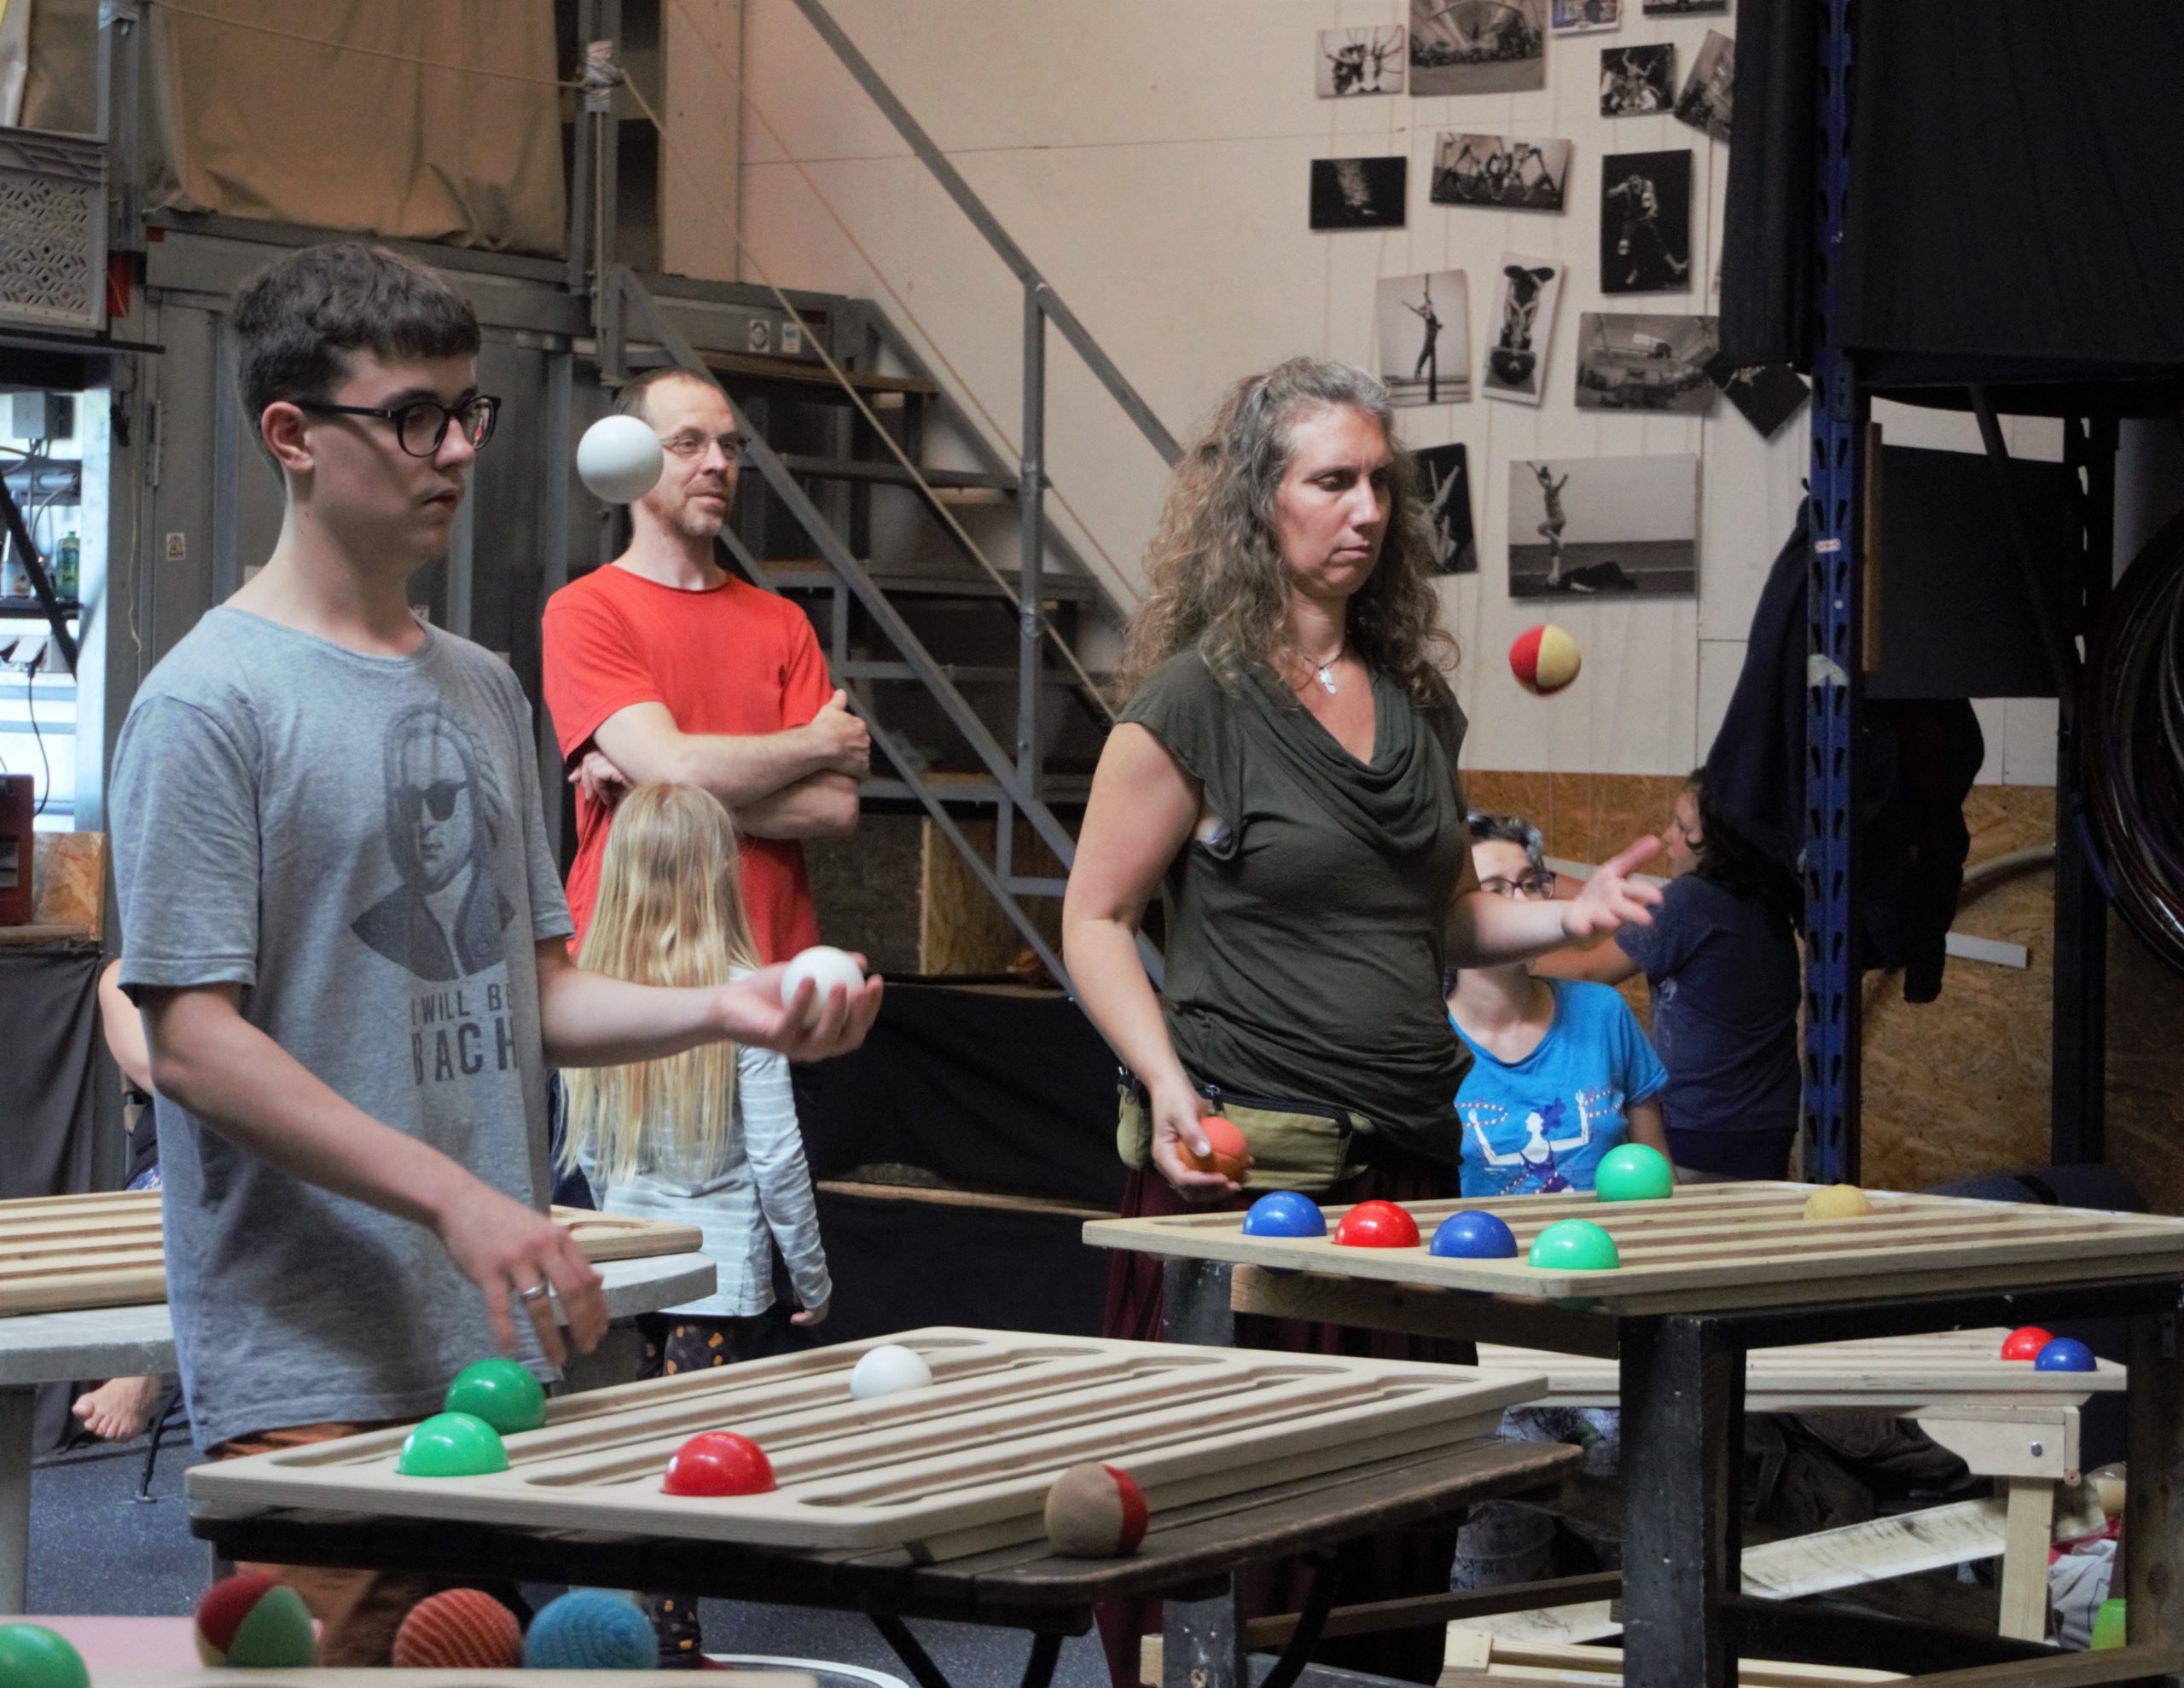 In an INspiral Circus Center classroom, three jugglers practice over functional juggling boards